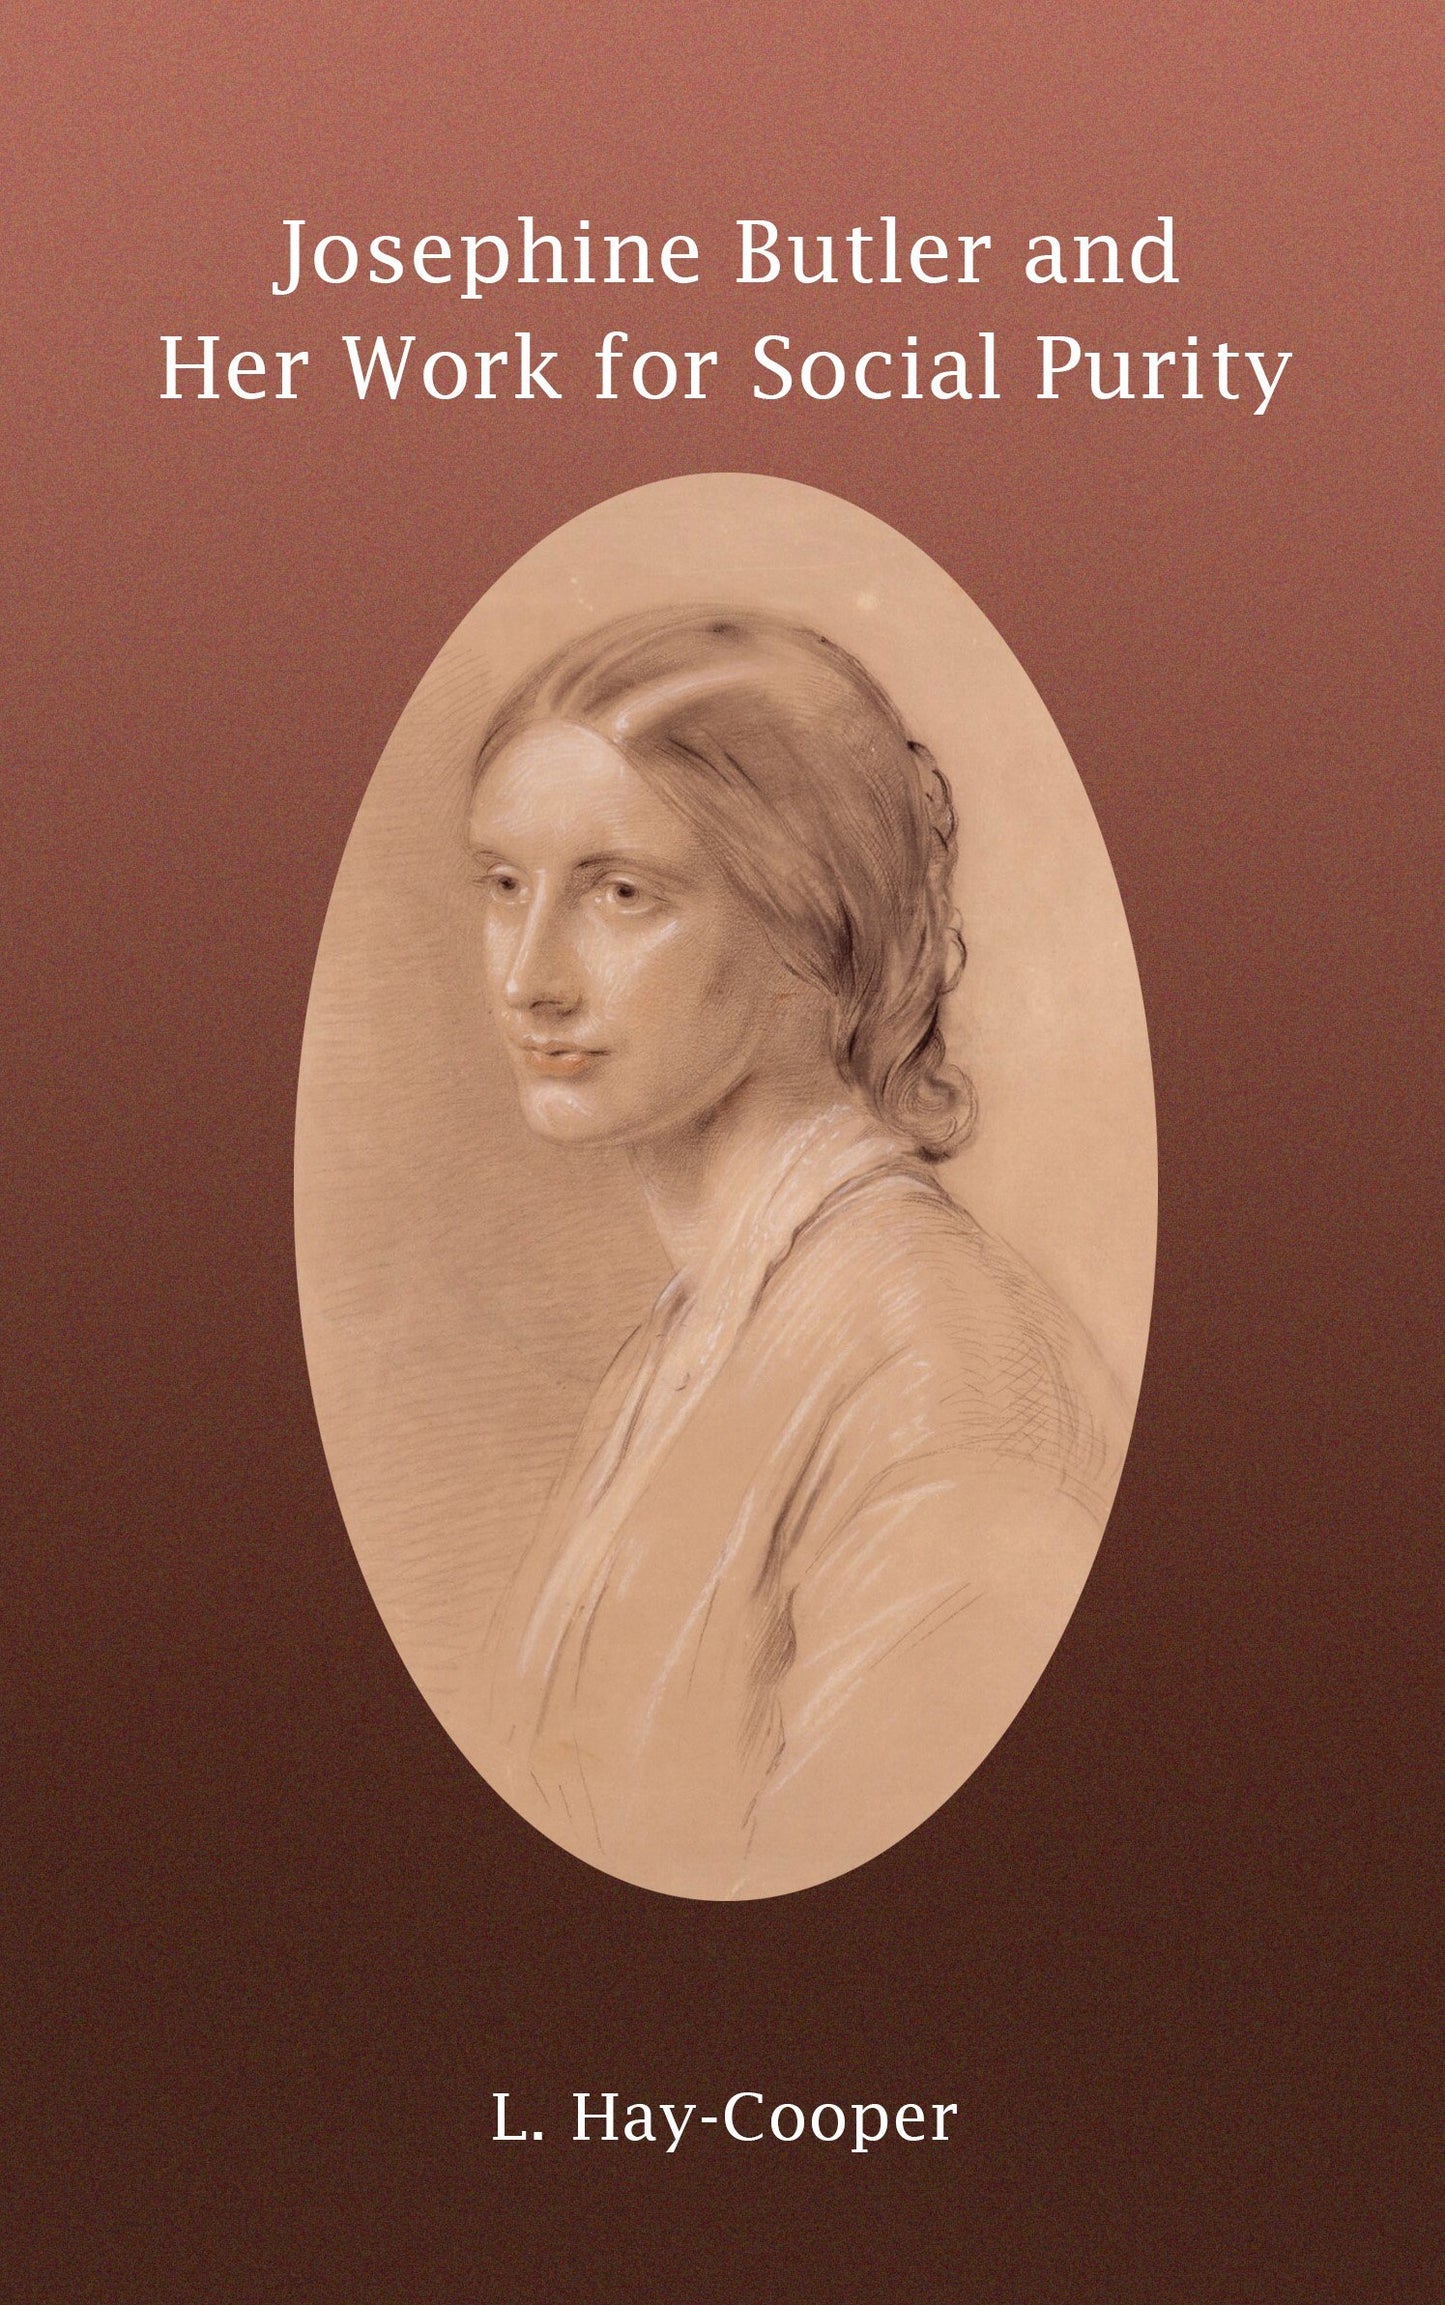 Josephine Butler and Her Work for Social Purity